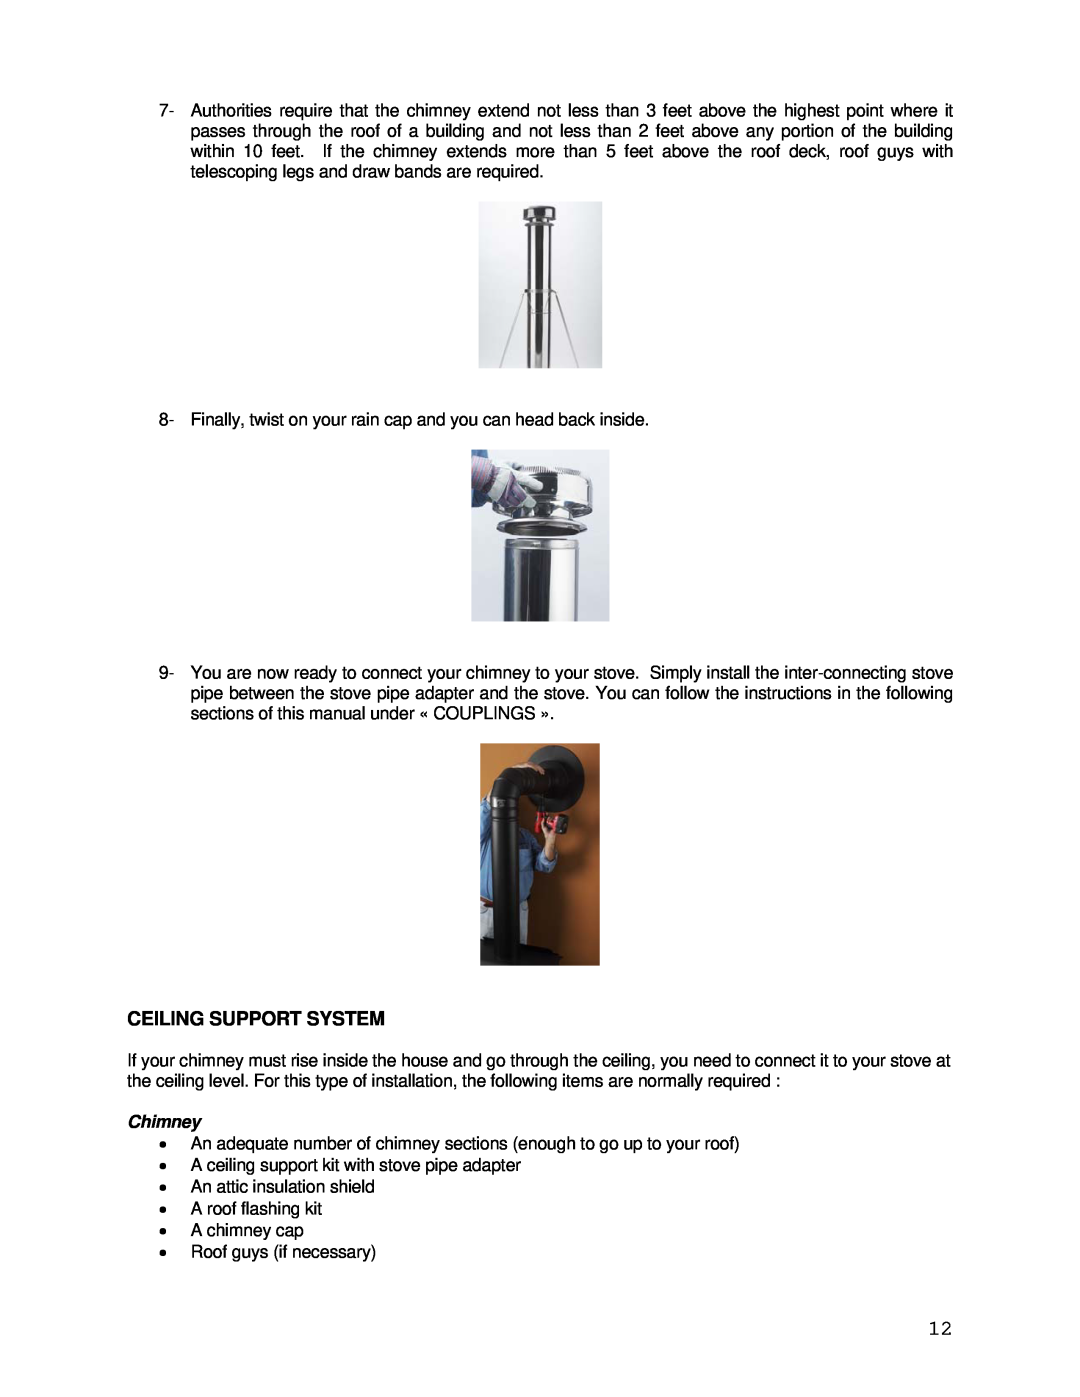 Drolet CS1200 manual Ceiling Support System, Chimney 